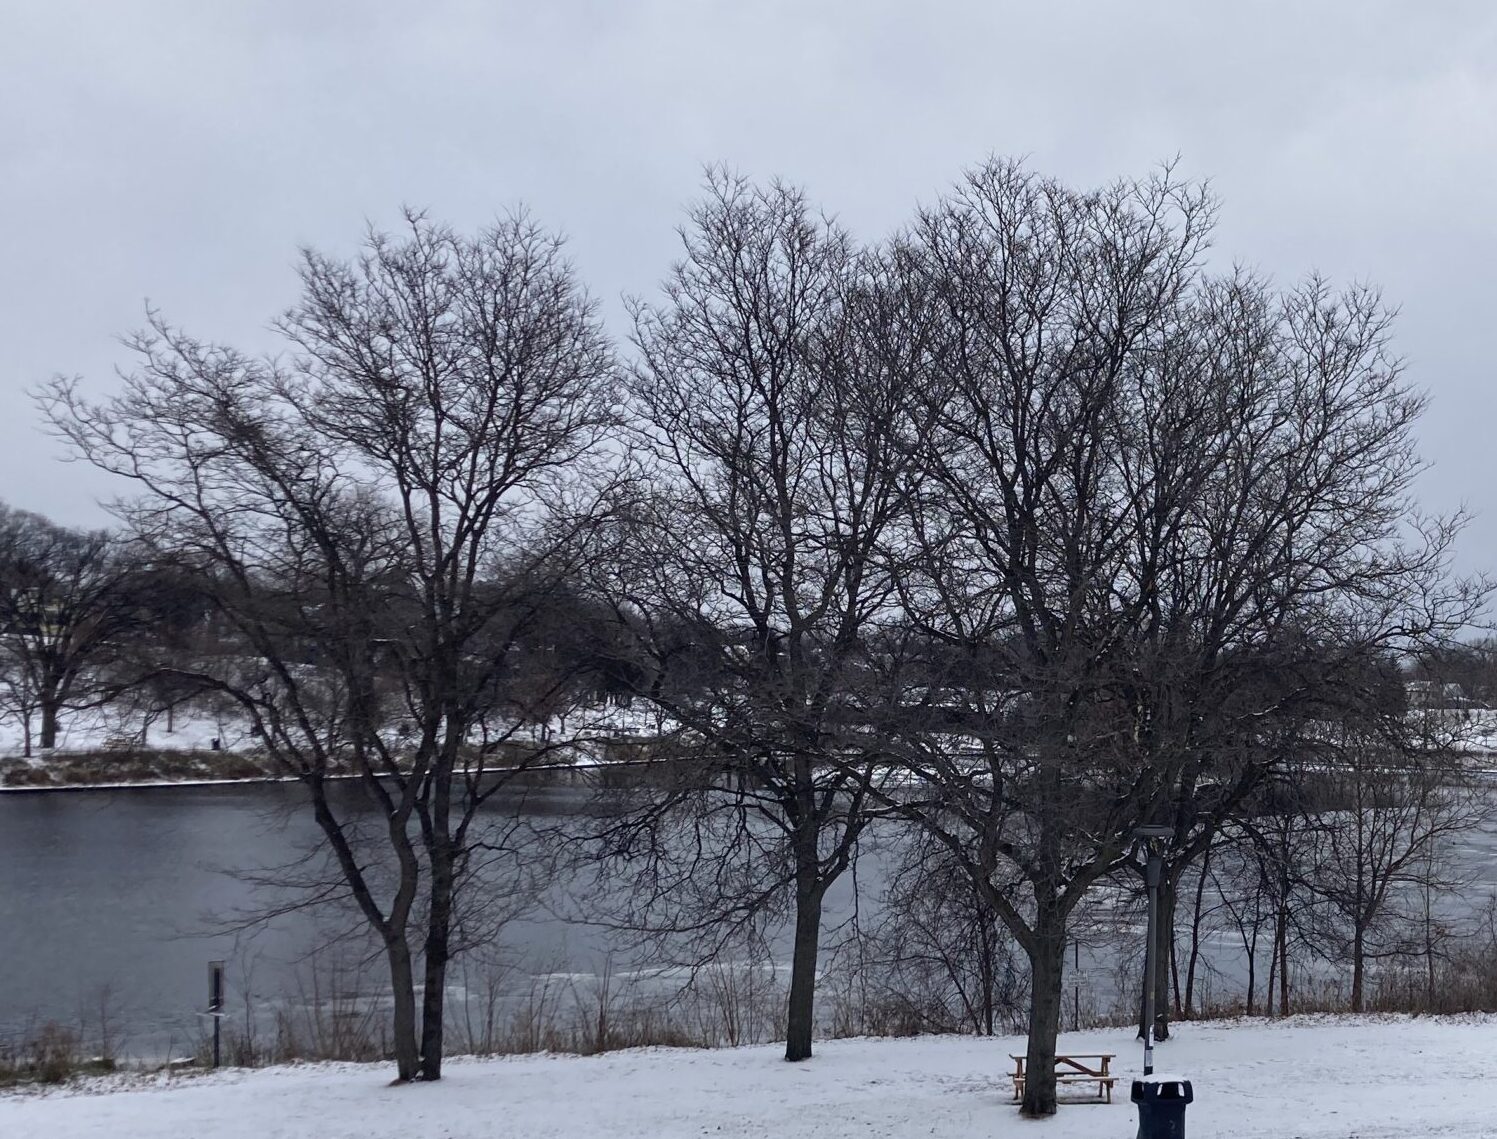 A group of trees in the snow that have lost their leaves in the foreground of a lake beginning to freeze